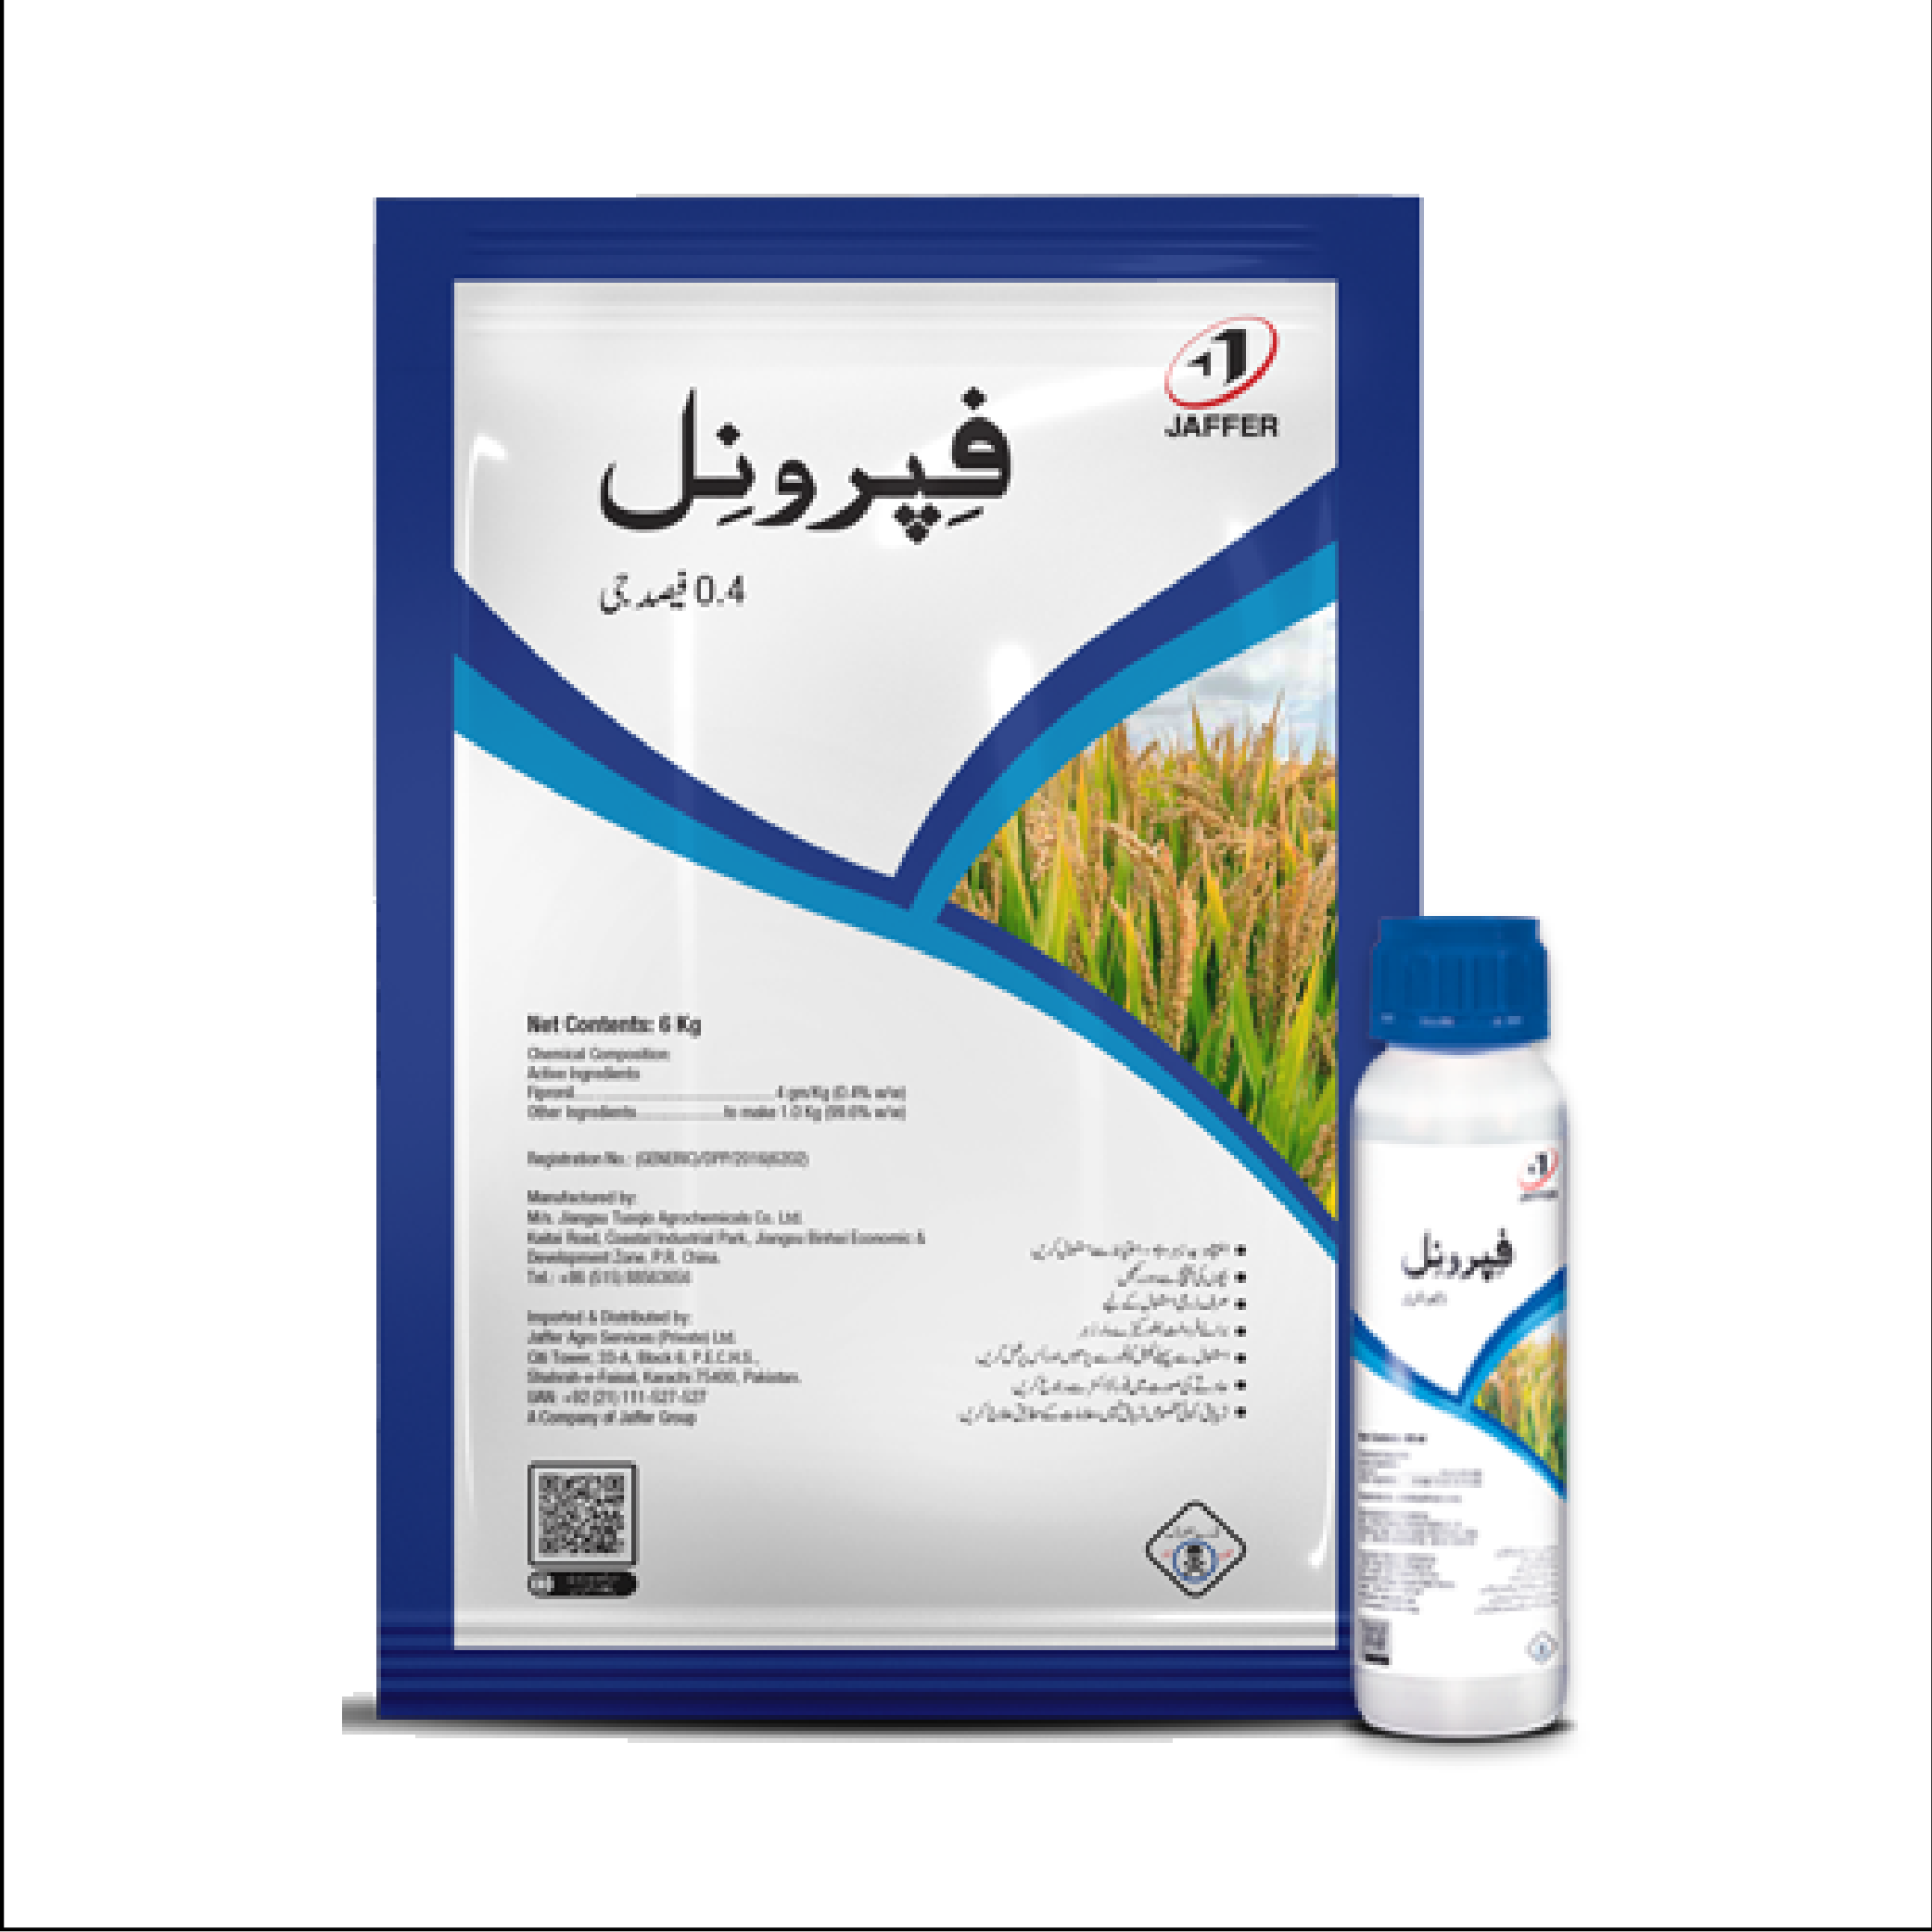 2nd Fipronil 4g 6kg Insecticide Jaffer Agro Services